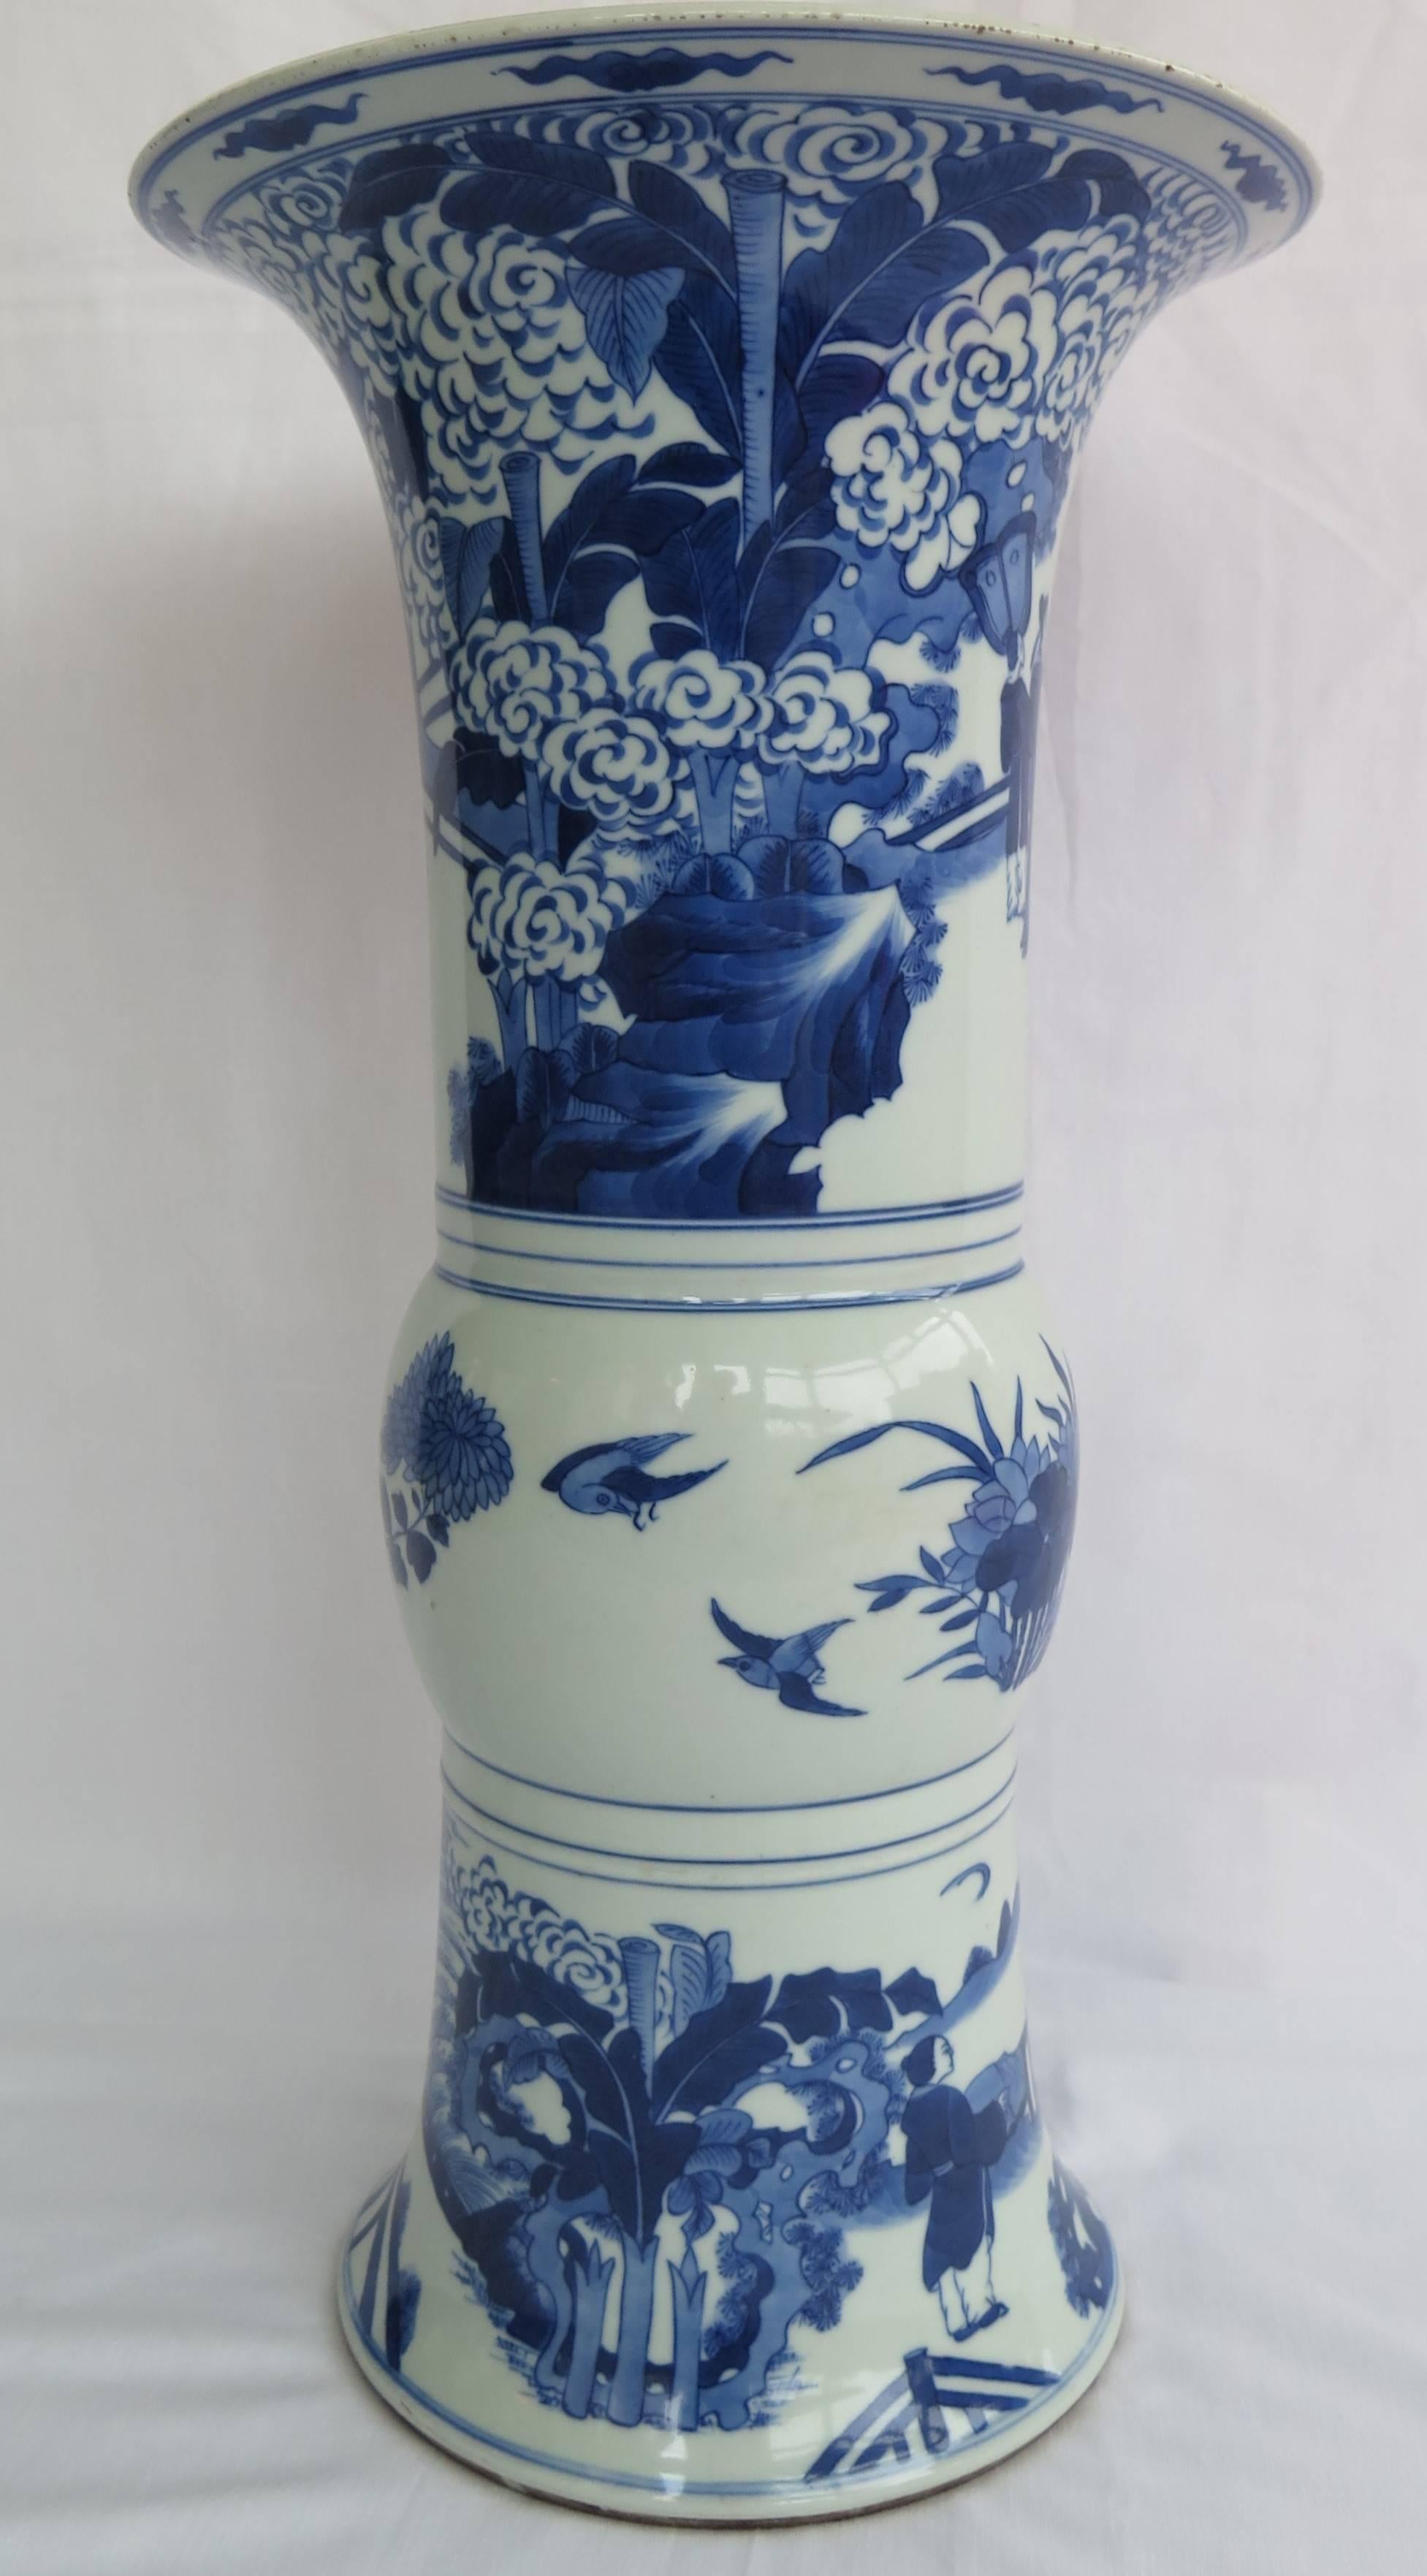 This is a very distinctive, large Chinese blue and white Gu-shaped beaker vase. The base has a painted double circle mark as used in the Kangxi period of the early 18th century but we date this vase to the early 19th century. 
 
This vase is